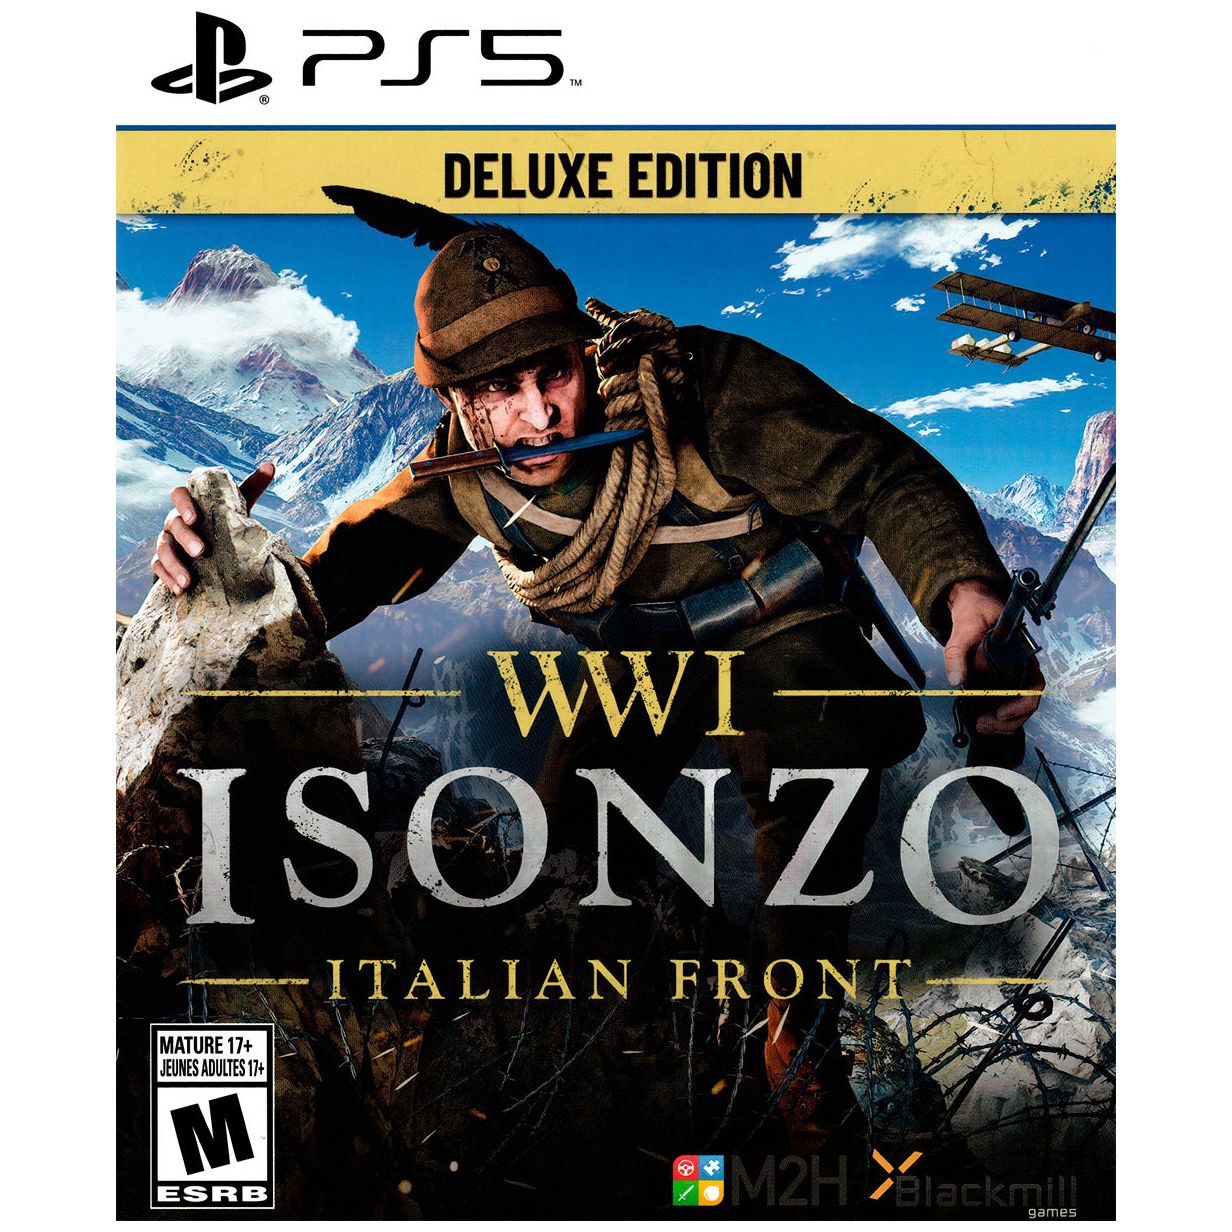 PS5 - WWI Isonzo Italian Front Deluxe Edition